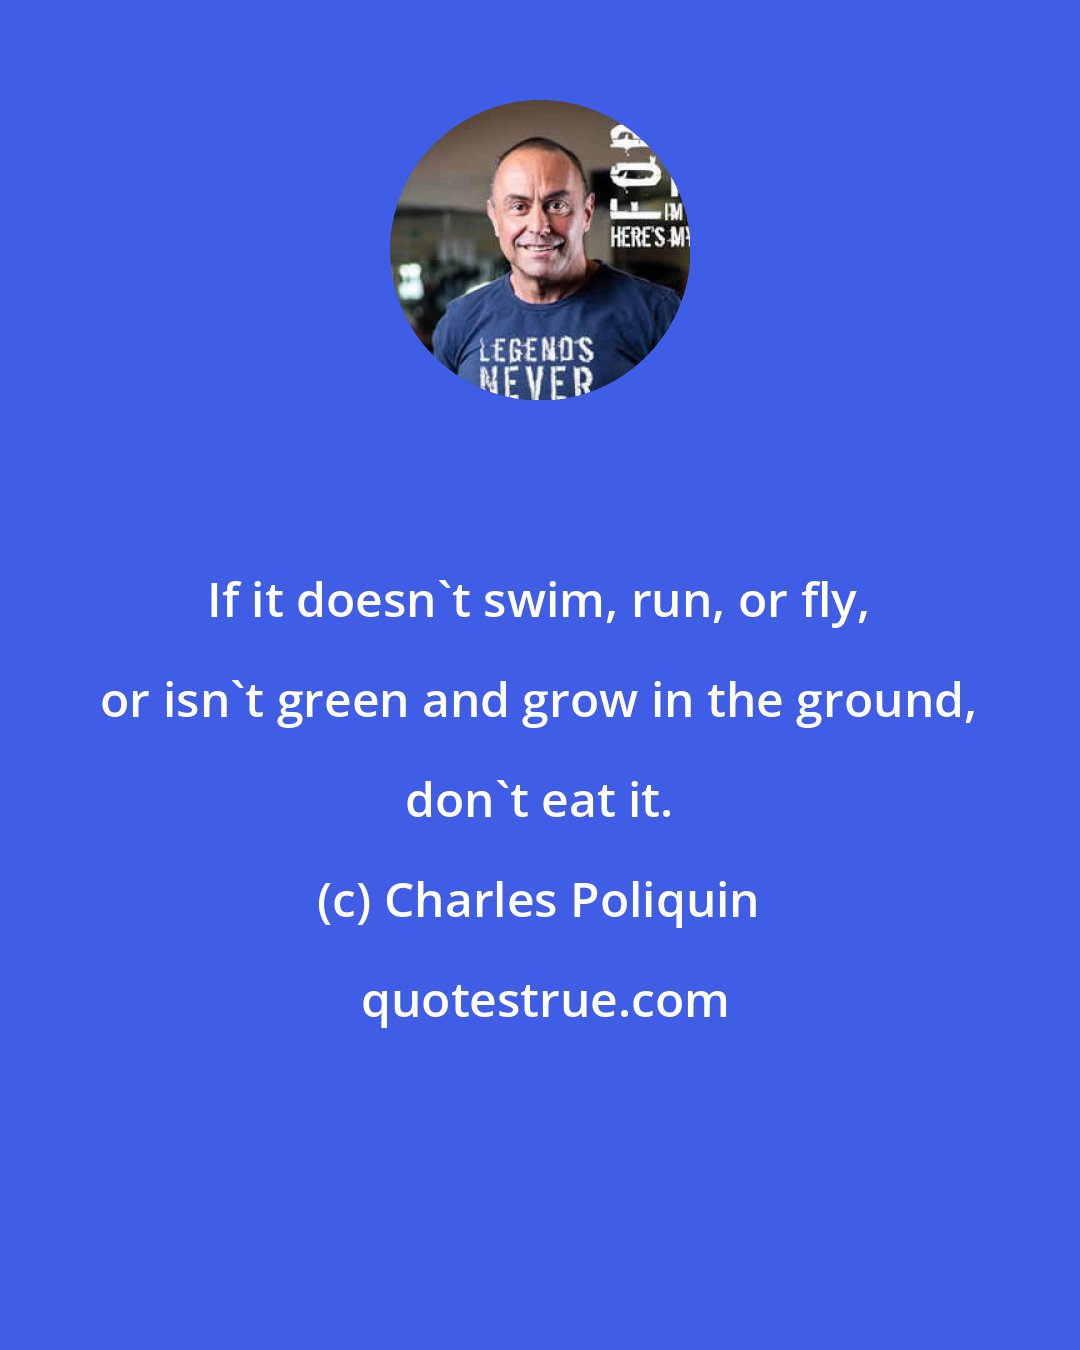 Charles Poliquin: If it doesn't swim, run, or fly, or isn't green and grow in the ground, don't eat it.